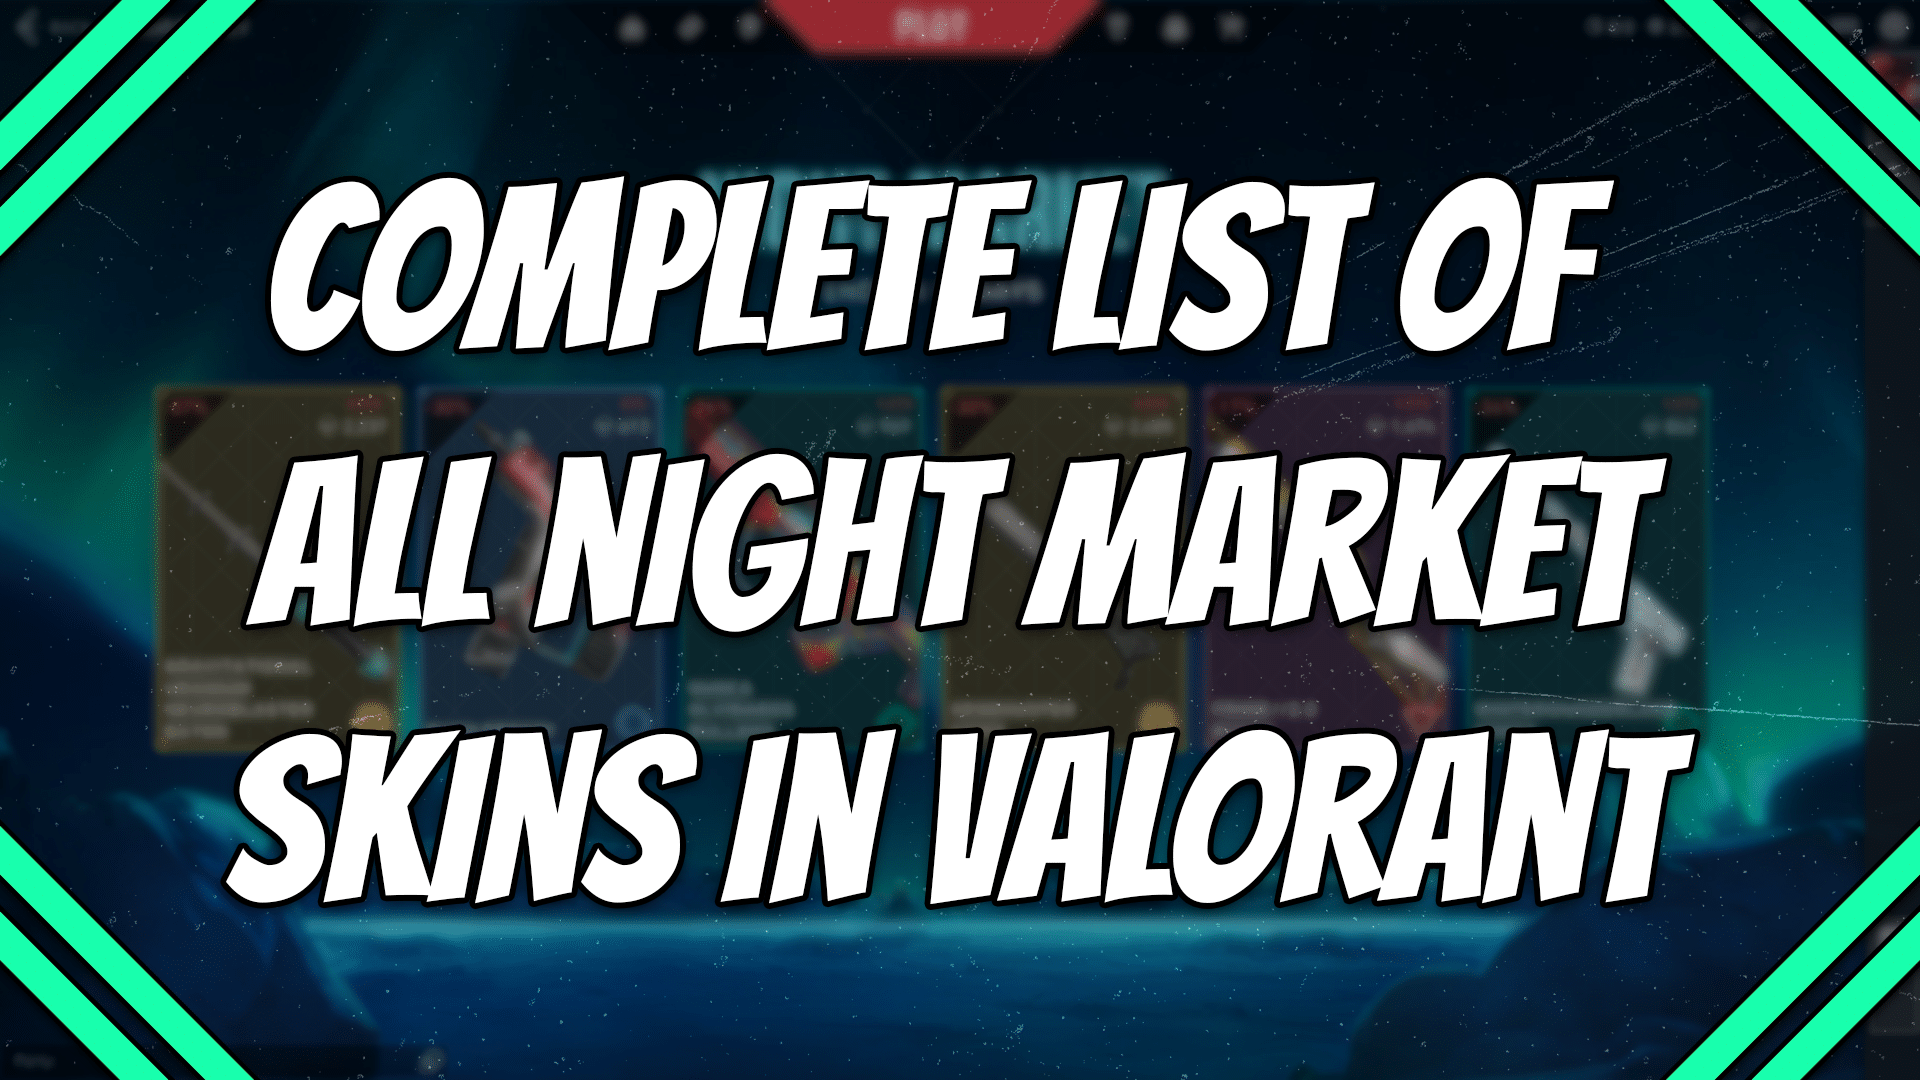 complete list of all Night Market skins in Valorant title card